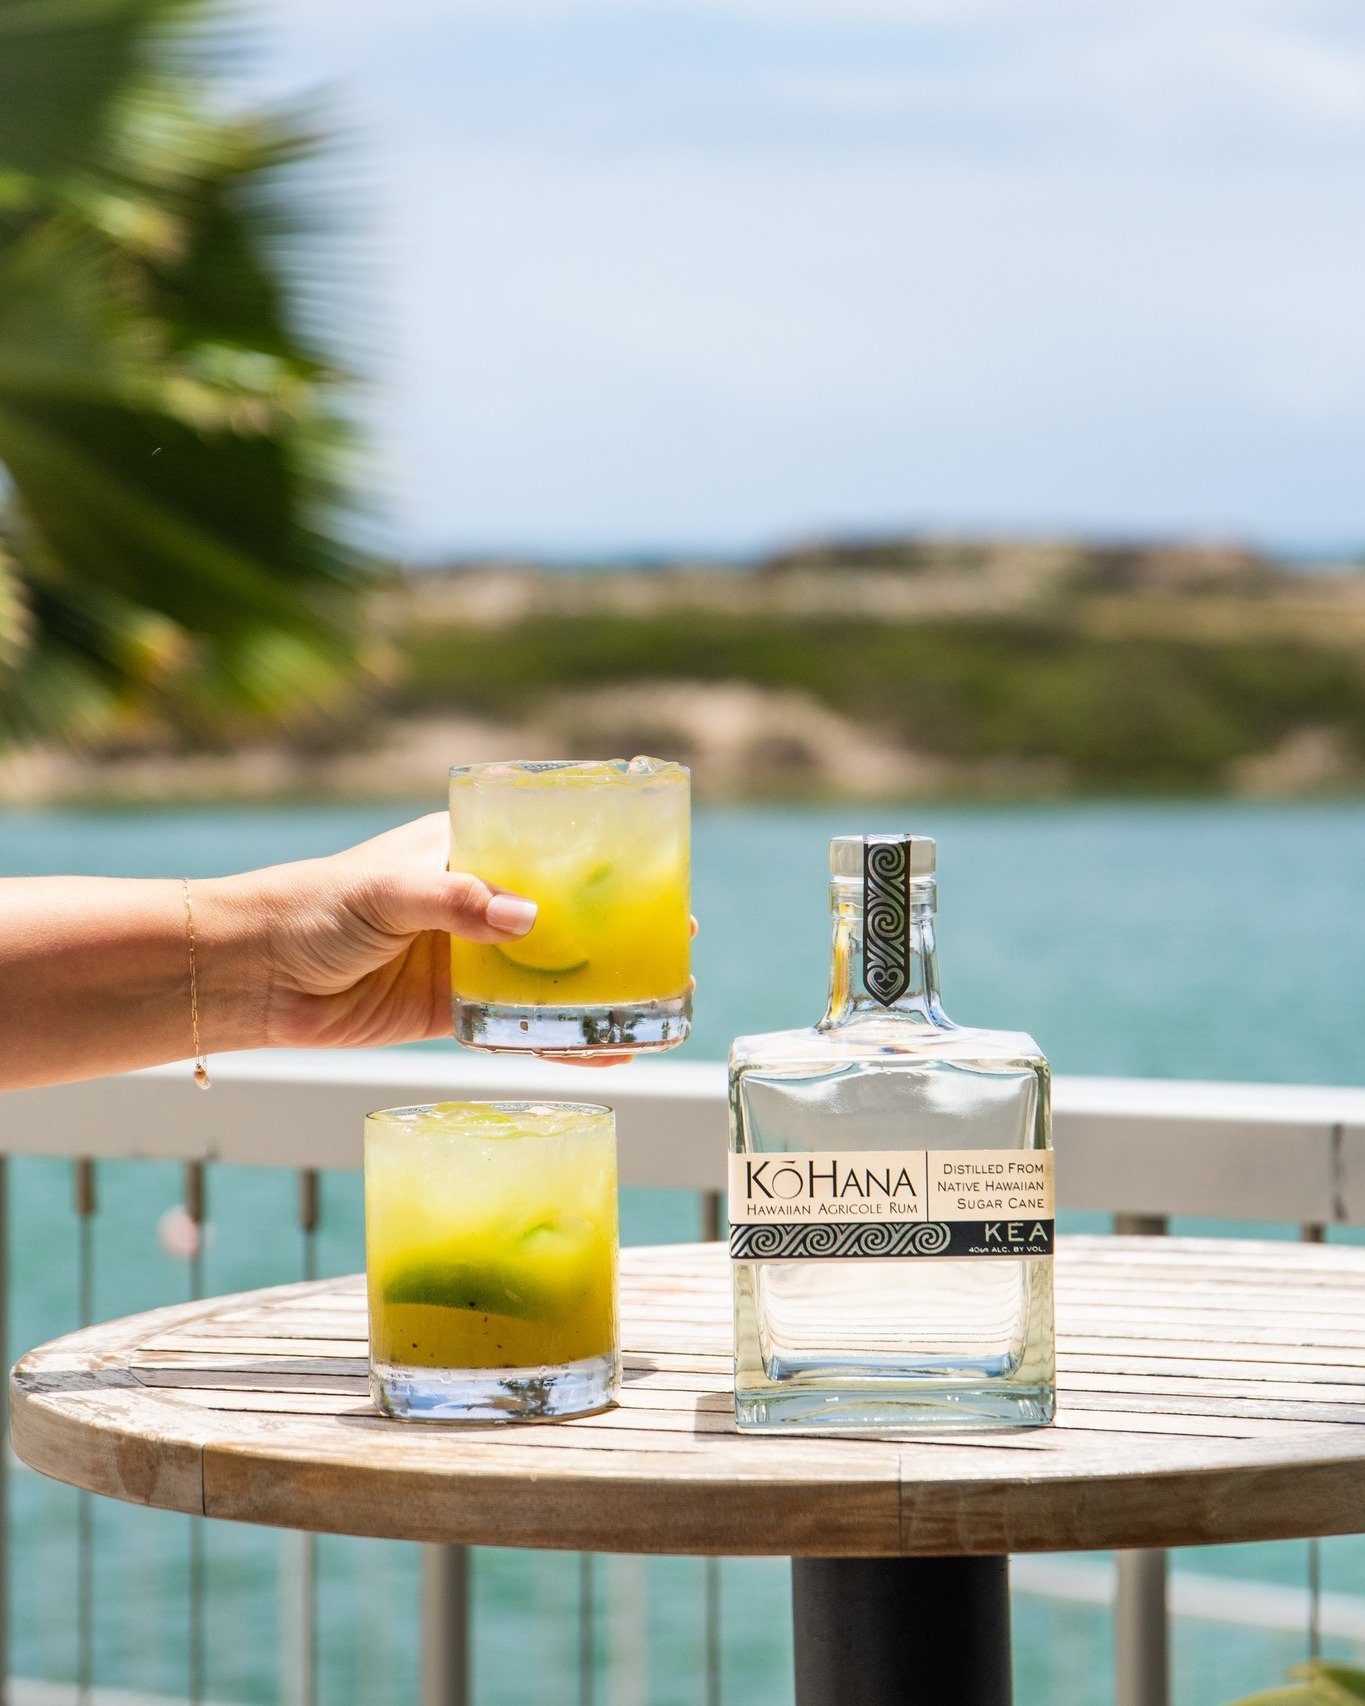 Aloha from @kitchendooroahu! We're thrilled to be featured in their &quot;Wai Kai-Pirinha&quot;, featuring  Kō Hana KEA, lime, and kiwi puree. Come for the cocktails, stay for the ambiance and ocean views. Your west side adventure awaits!

#KōHana  #